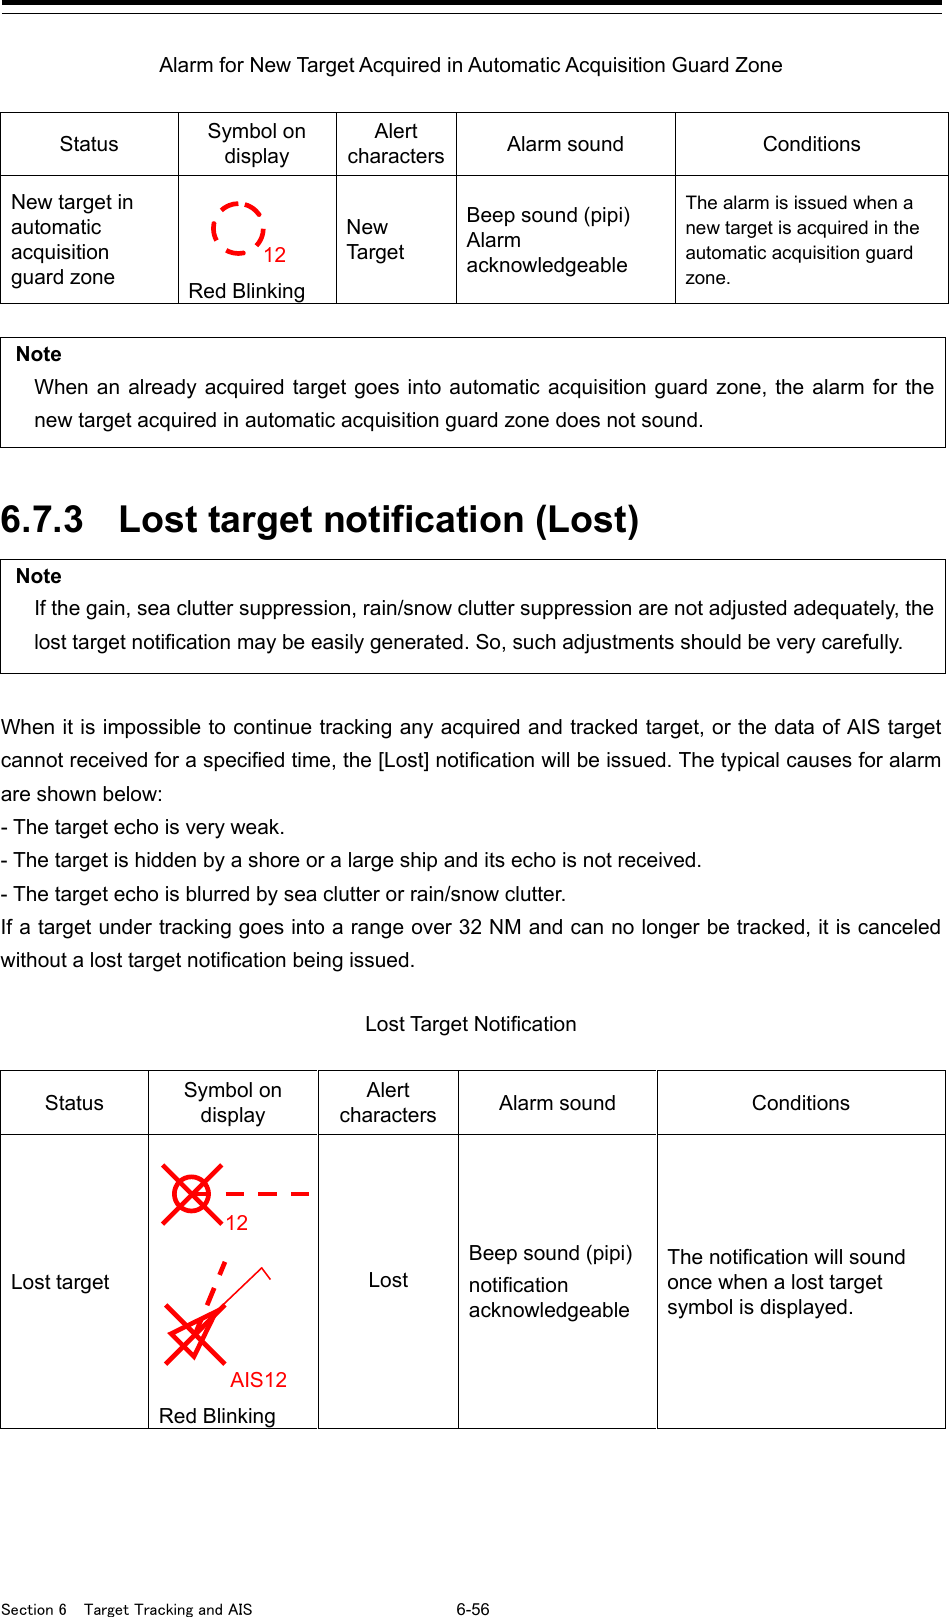  Section 6  Target Tracking and AIS 6-56  Alarm for New Target Acquired in Automatic Acquisition Guard Zone  Status Symbol on display Alert characters Alarm sound Conditions New target in automatic acquisition guard zone   Red Blinking New Target Beep sound (pipi) Alarm acknowledgeable   The alarm is issued when a new target is acquired in the automatic acquisition guard zone.  Note When an already acquired target goes into automatic acquisition guard zone, the alarm for the new target acquired in automatic acquisition guard zone does not sound.   6.7.3 Lost target notification (Lost) Note If the gain, sea clutter suppression, rain/snow clutter suppression are not adjusted adequately, the lost target notification may be easily generated. So, such adjustments should be very carefully.  When it is impossible to continue tracking any acquired and tracked target, or the data of AIS target cannot received for a specified time, the [Lost] notification will be issued. The typical causes for alarm are shown below:   - The target echo is very weak. - The target is hidden by a shore or a large ship and its echo is not received. - The target echo is blurred by sea clutter or rain/snow clutter. If a target under tracking goes into a range over 32 NM and can no longer be tracked, it is canceled without a lost target notification being issued.    Lost Target Notification  Status Symbol on display Alert characters Alarm sound Conditions Lost target    Red Blinking  Lost  Beep sound (pipi) notification acknowledgeable The notification will sound once when a lost target symbol is displayed.     AIS12  12  12 